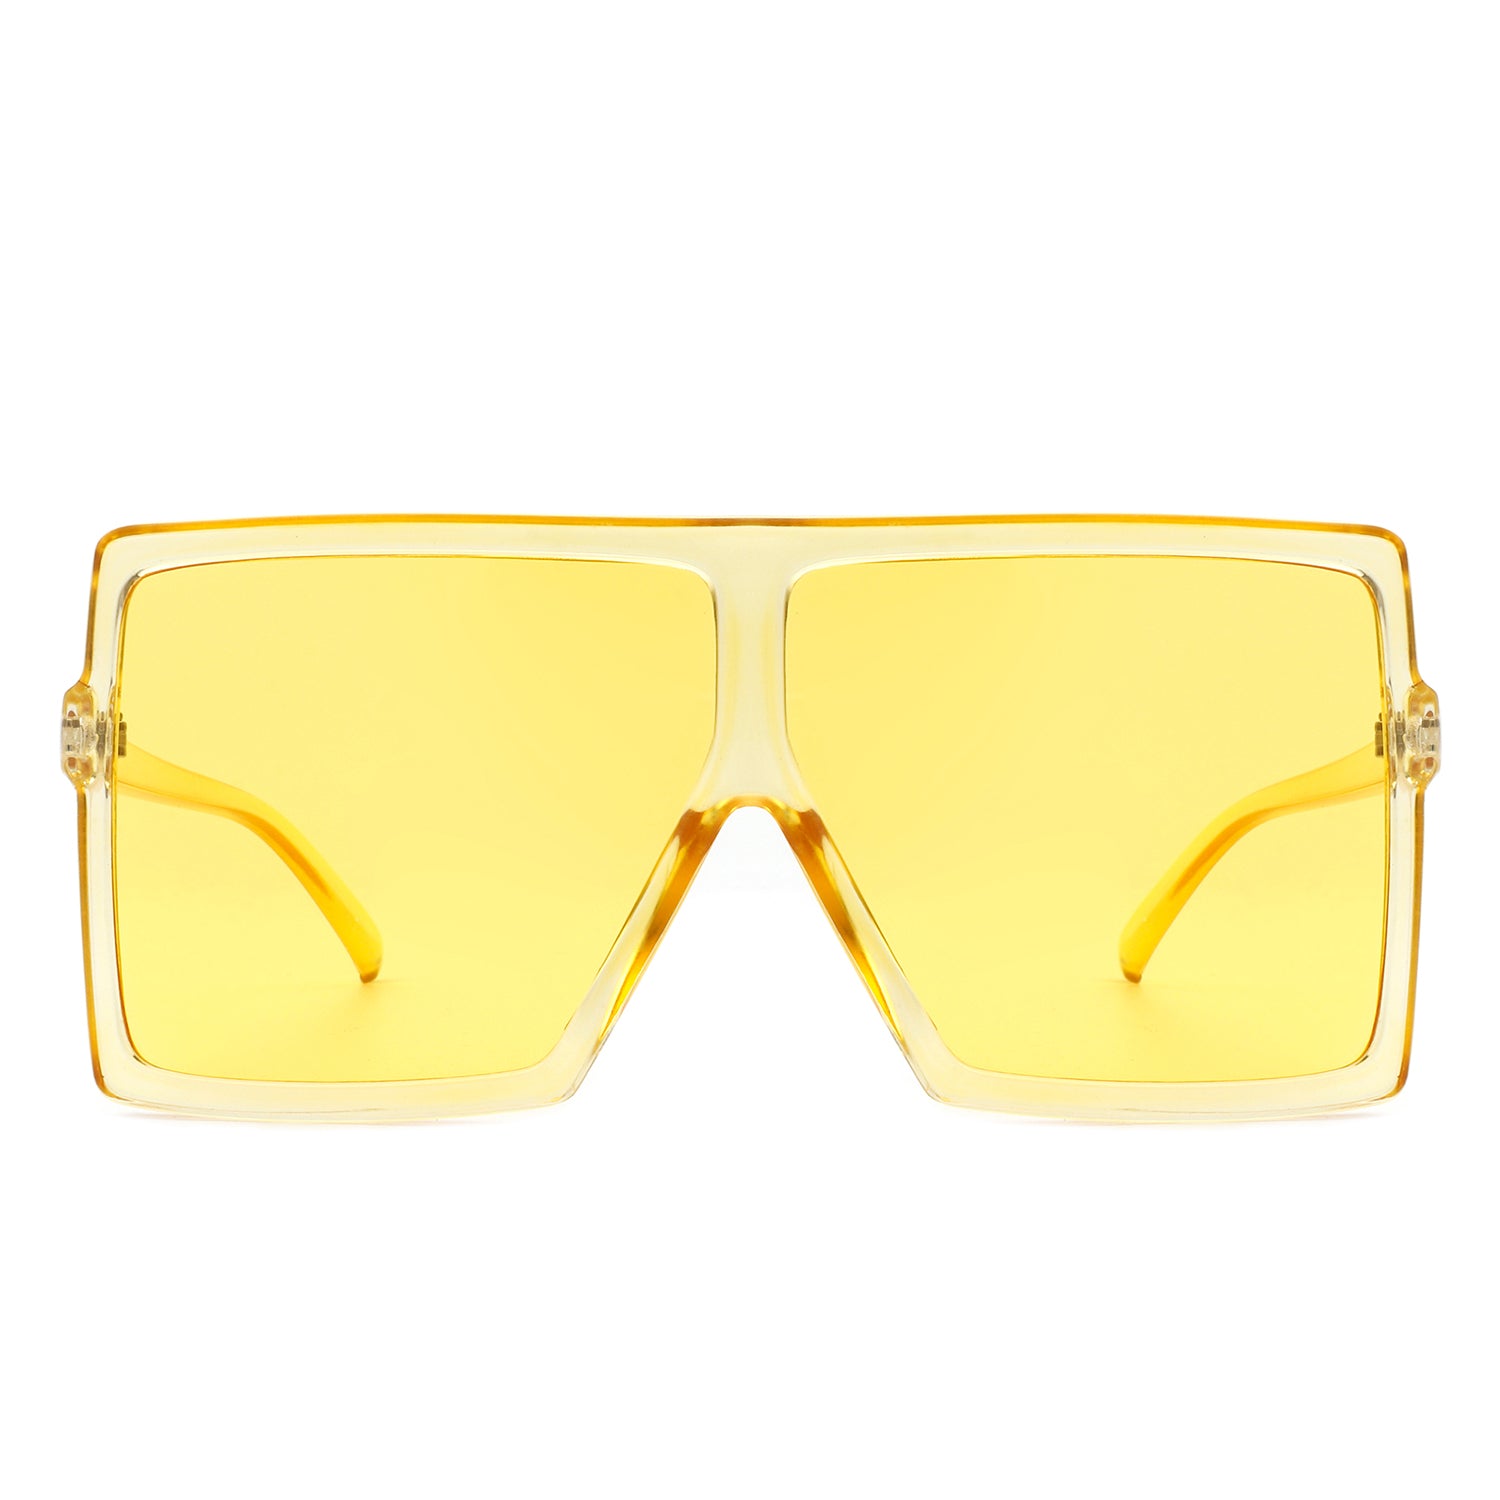 1pc Women's Yellow Plastic Flat Top Sunglasses, Suitable For